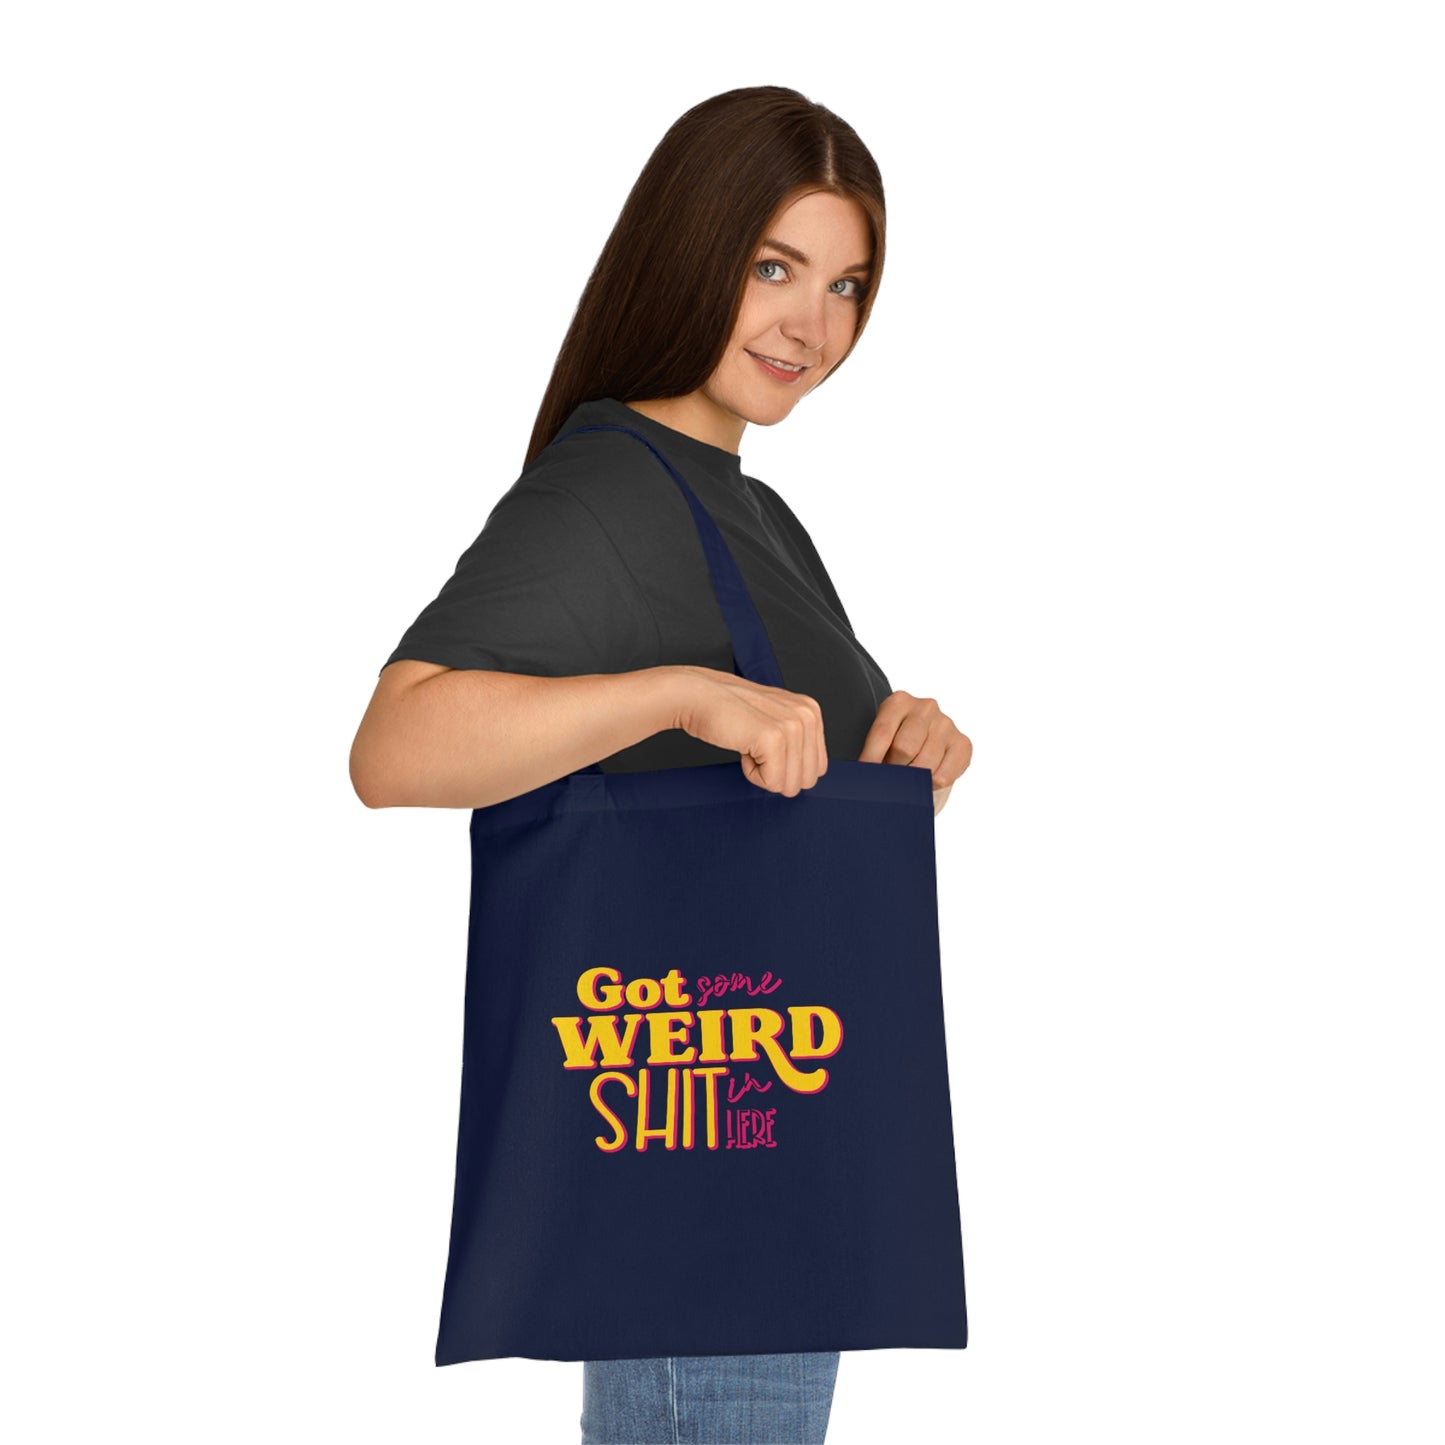 Weirdo | Cotton tote bag with funny meme ‘Got some weird shit in here.’ What kinda weird shit are you hiding in this 100% cotton shopping bag.